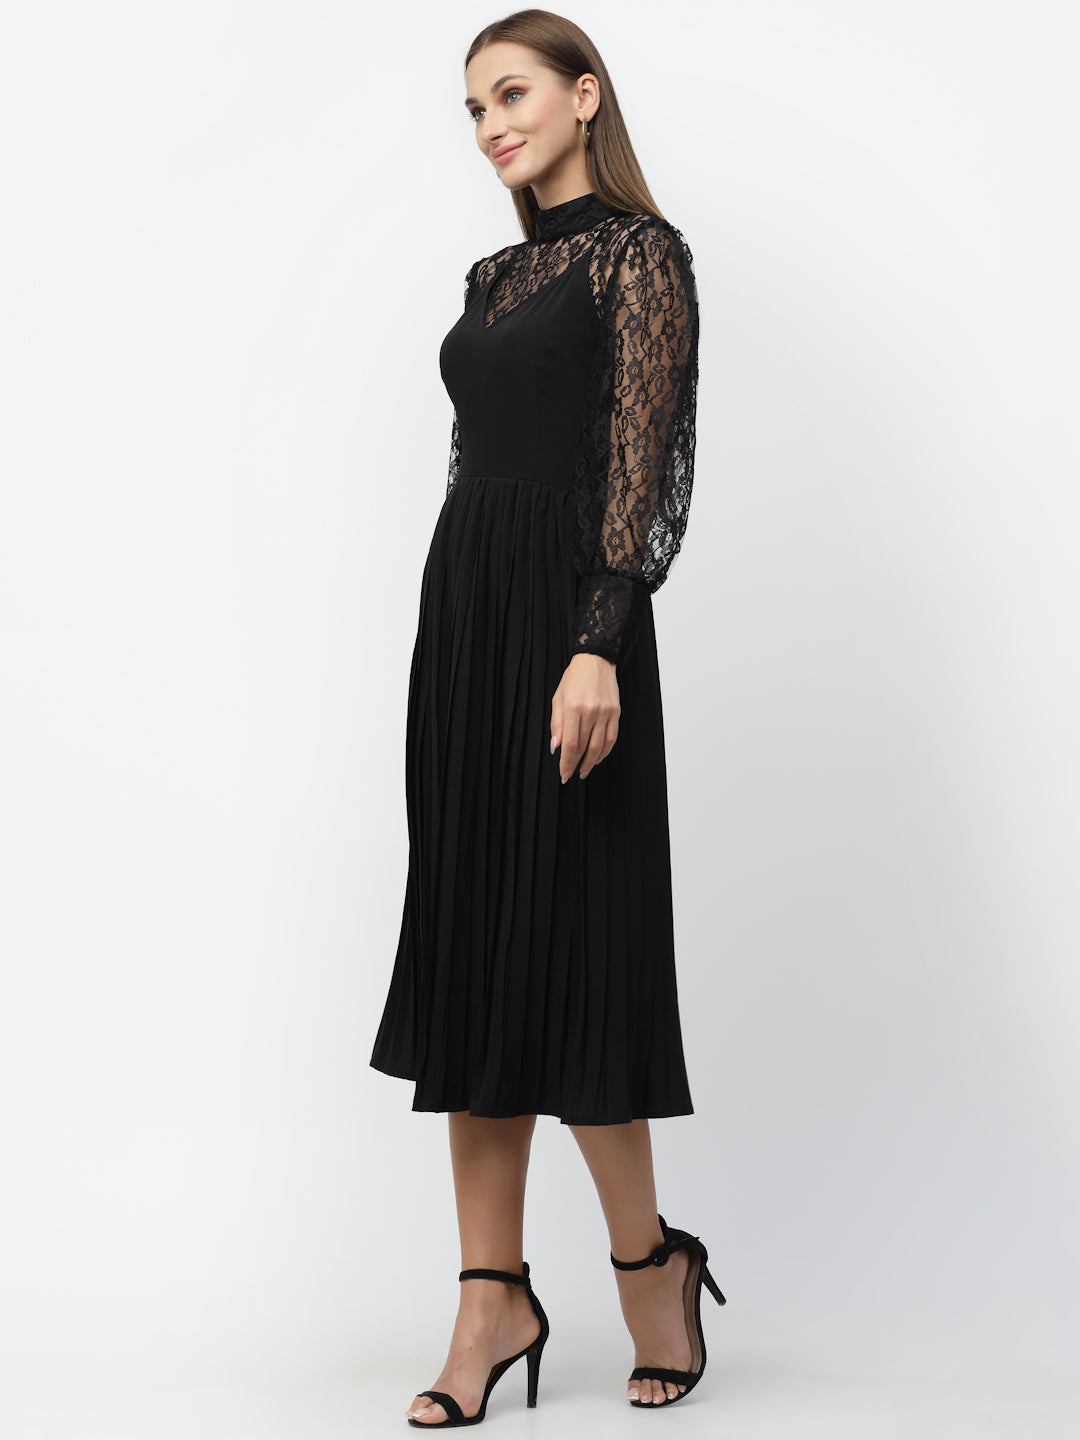 Black Flared Pleated Dress With Lace Top